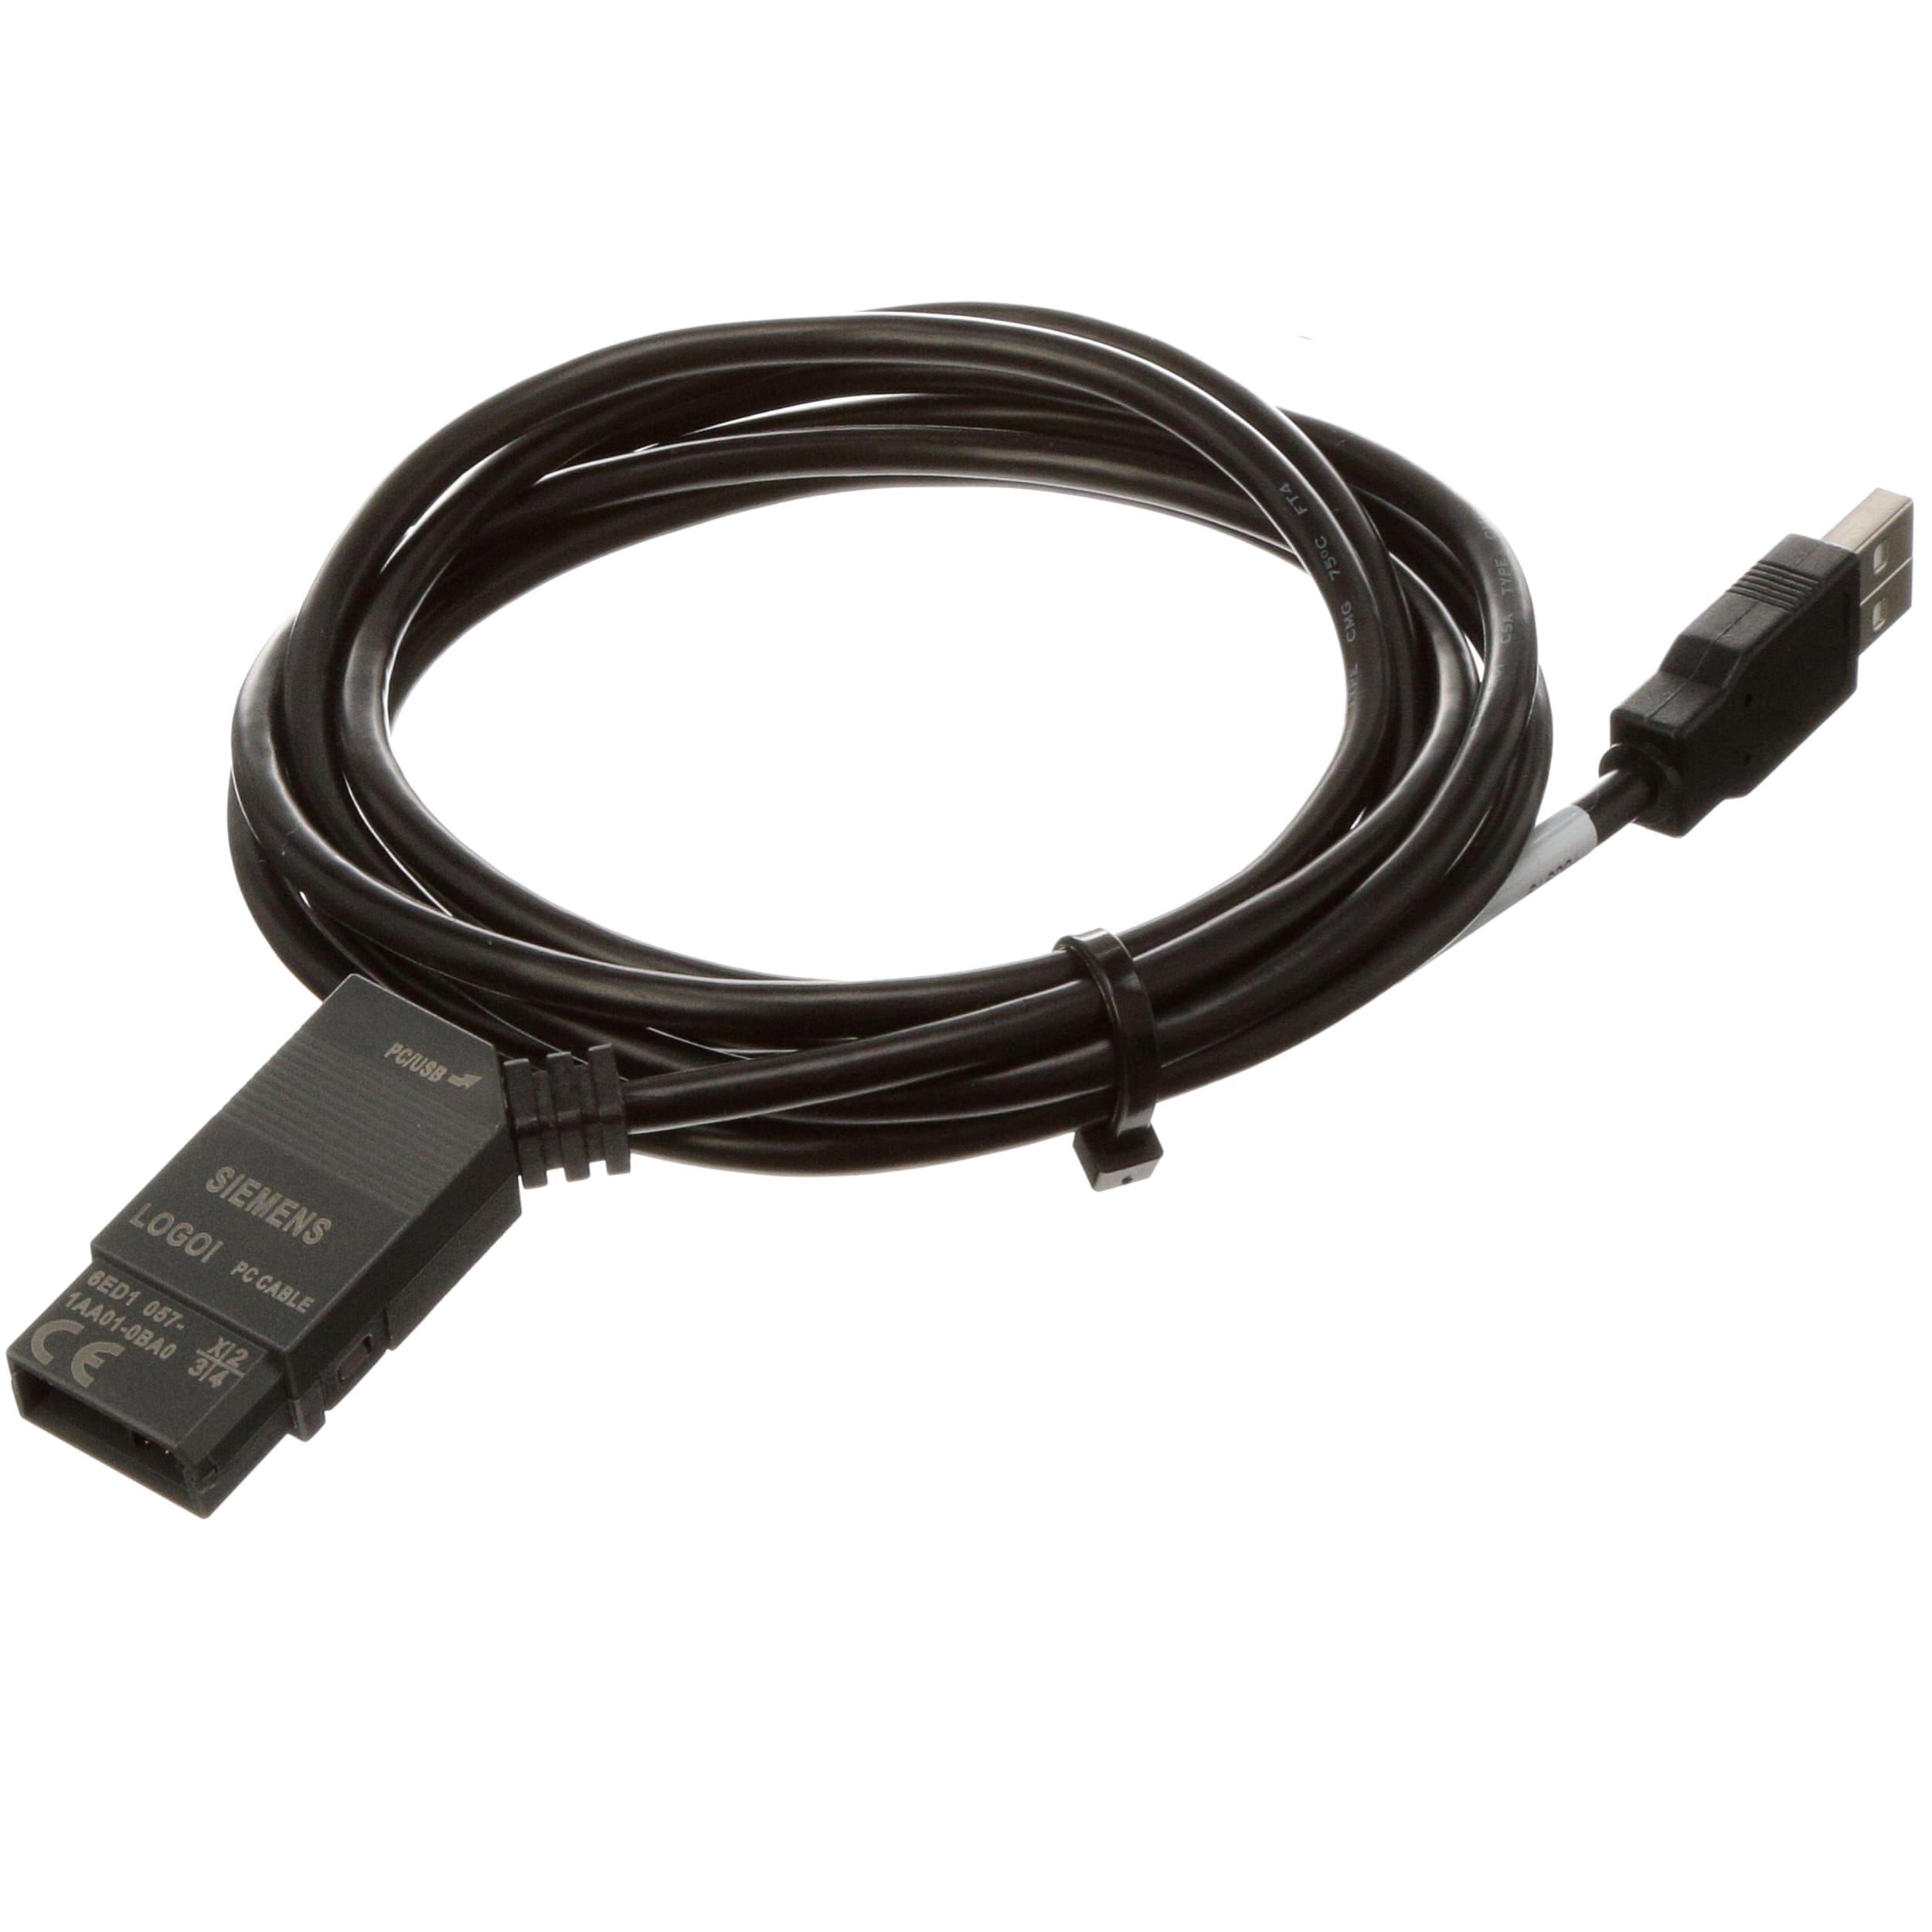 New LOGO!USB-CABLE Programming Cable for SIEMENS LOGO =6ED1057-1AA01-0BA0 